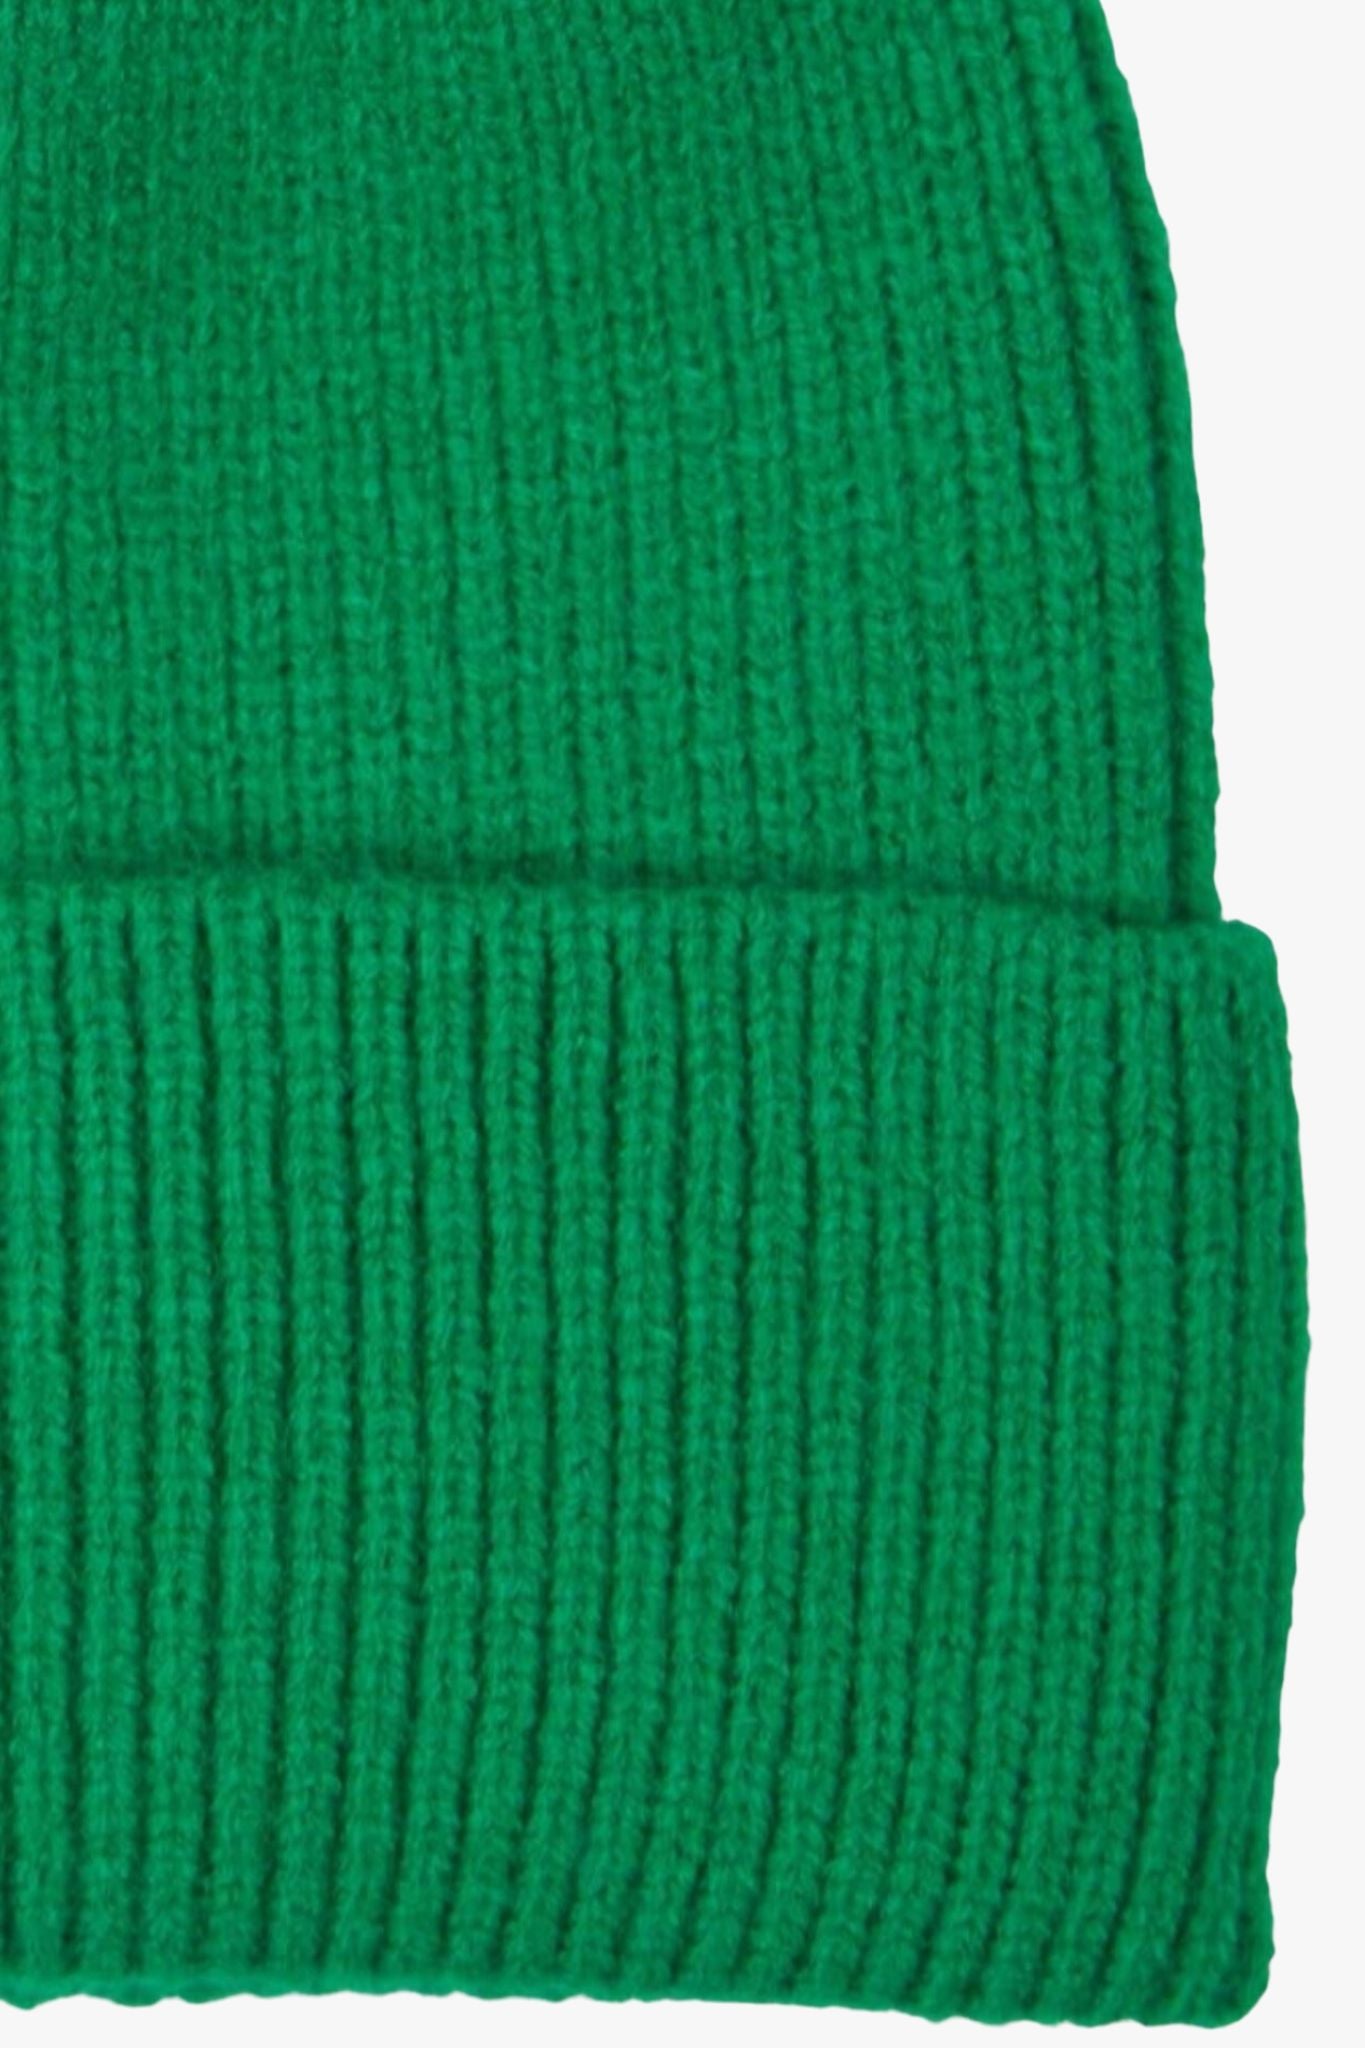 close up of the ribbed knitted fabric